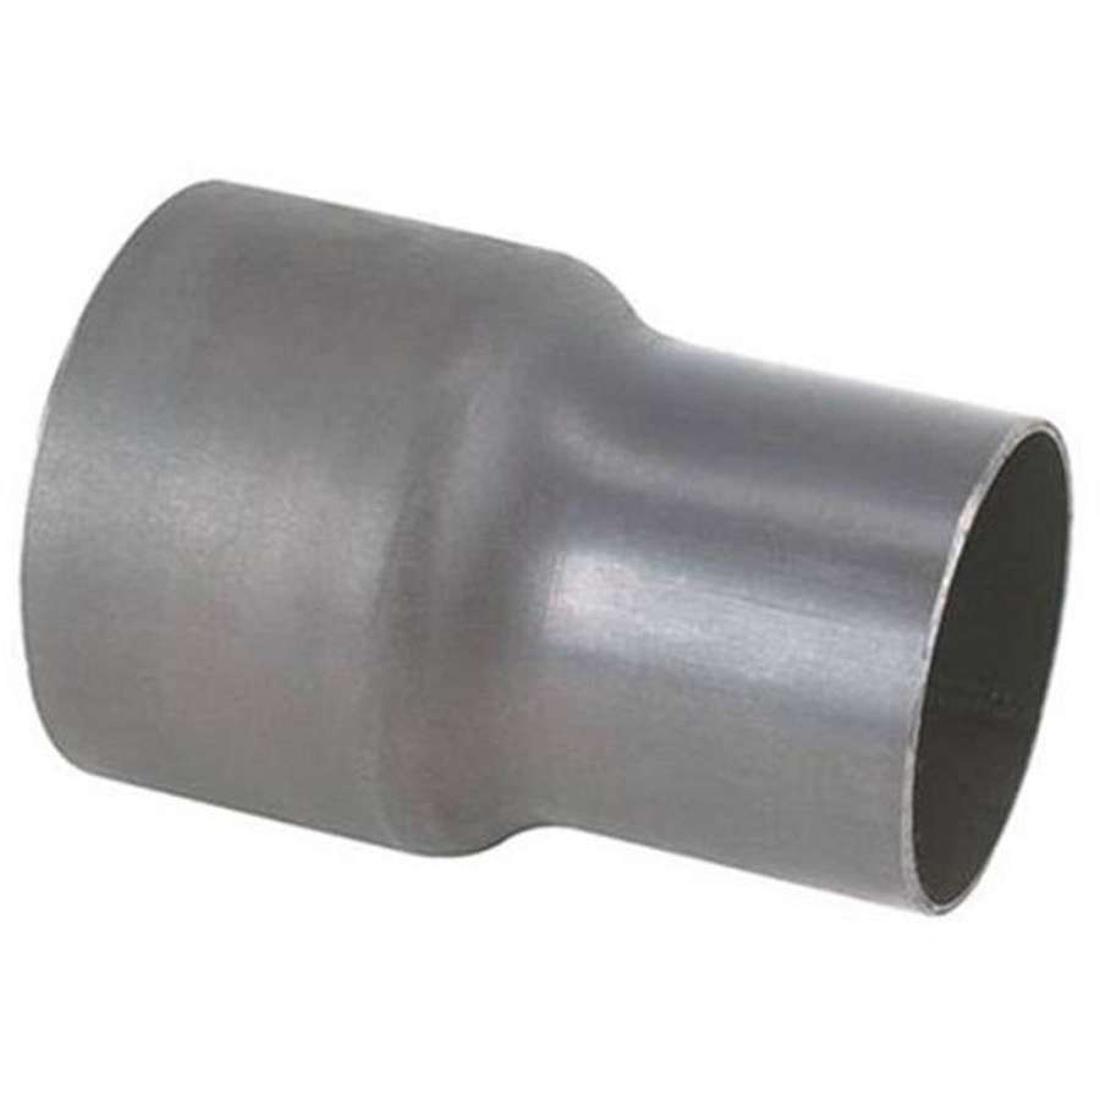 Exhaust Pipe Reducer 4" 100mm - 5" 125mm image